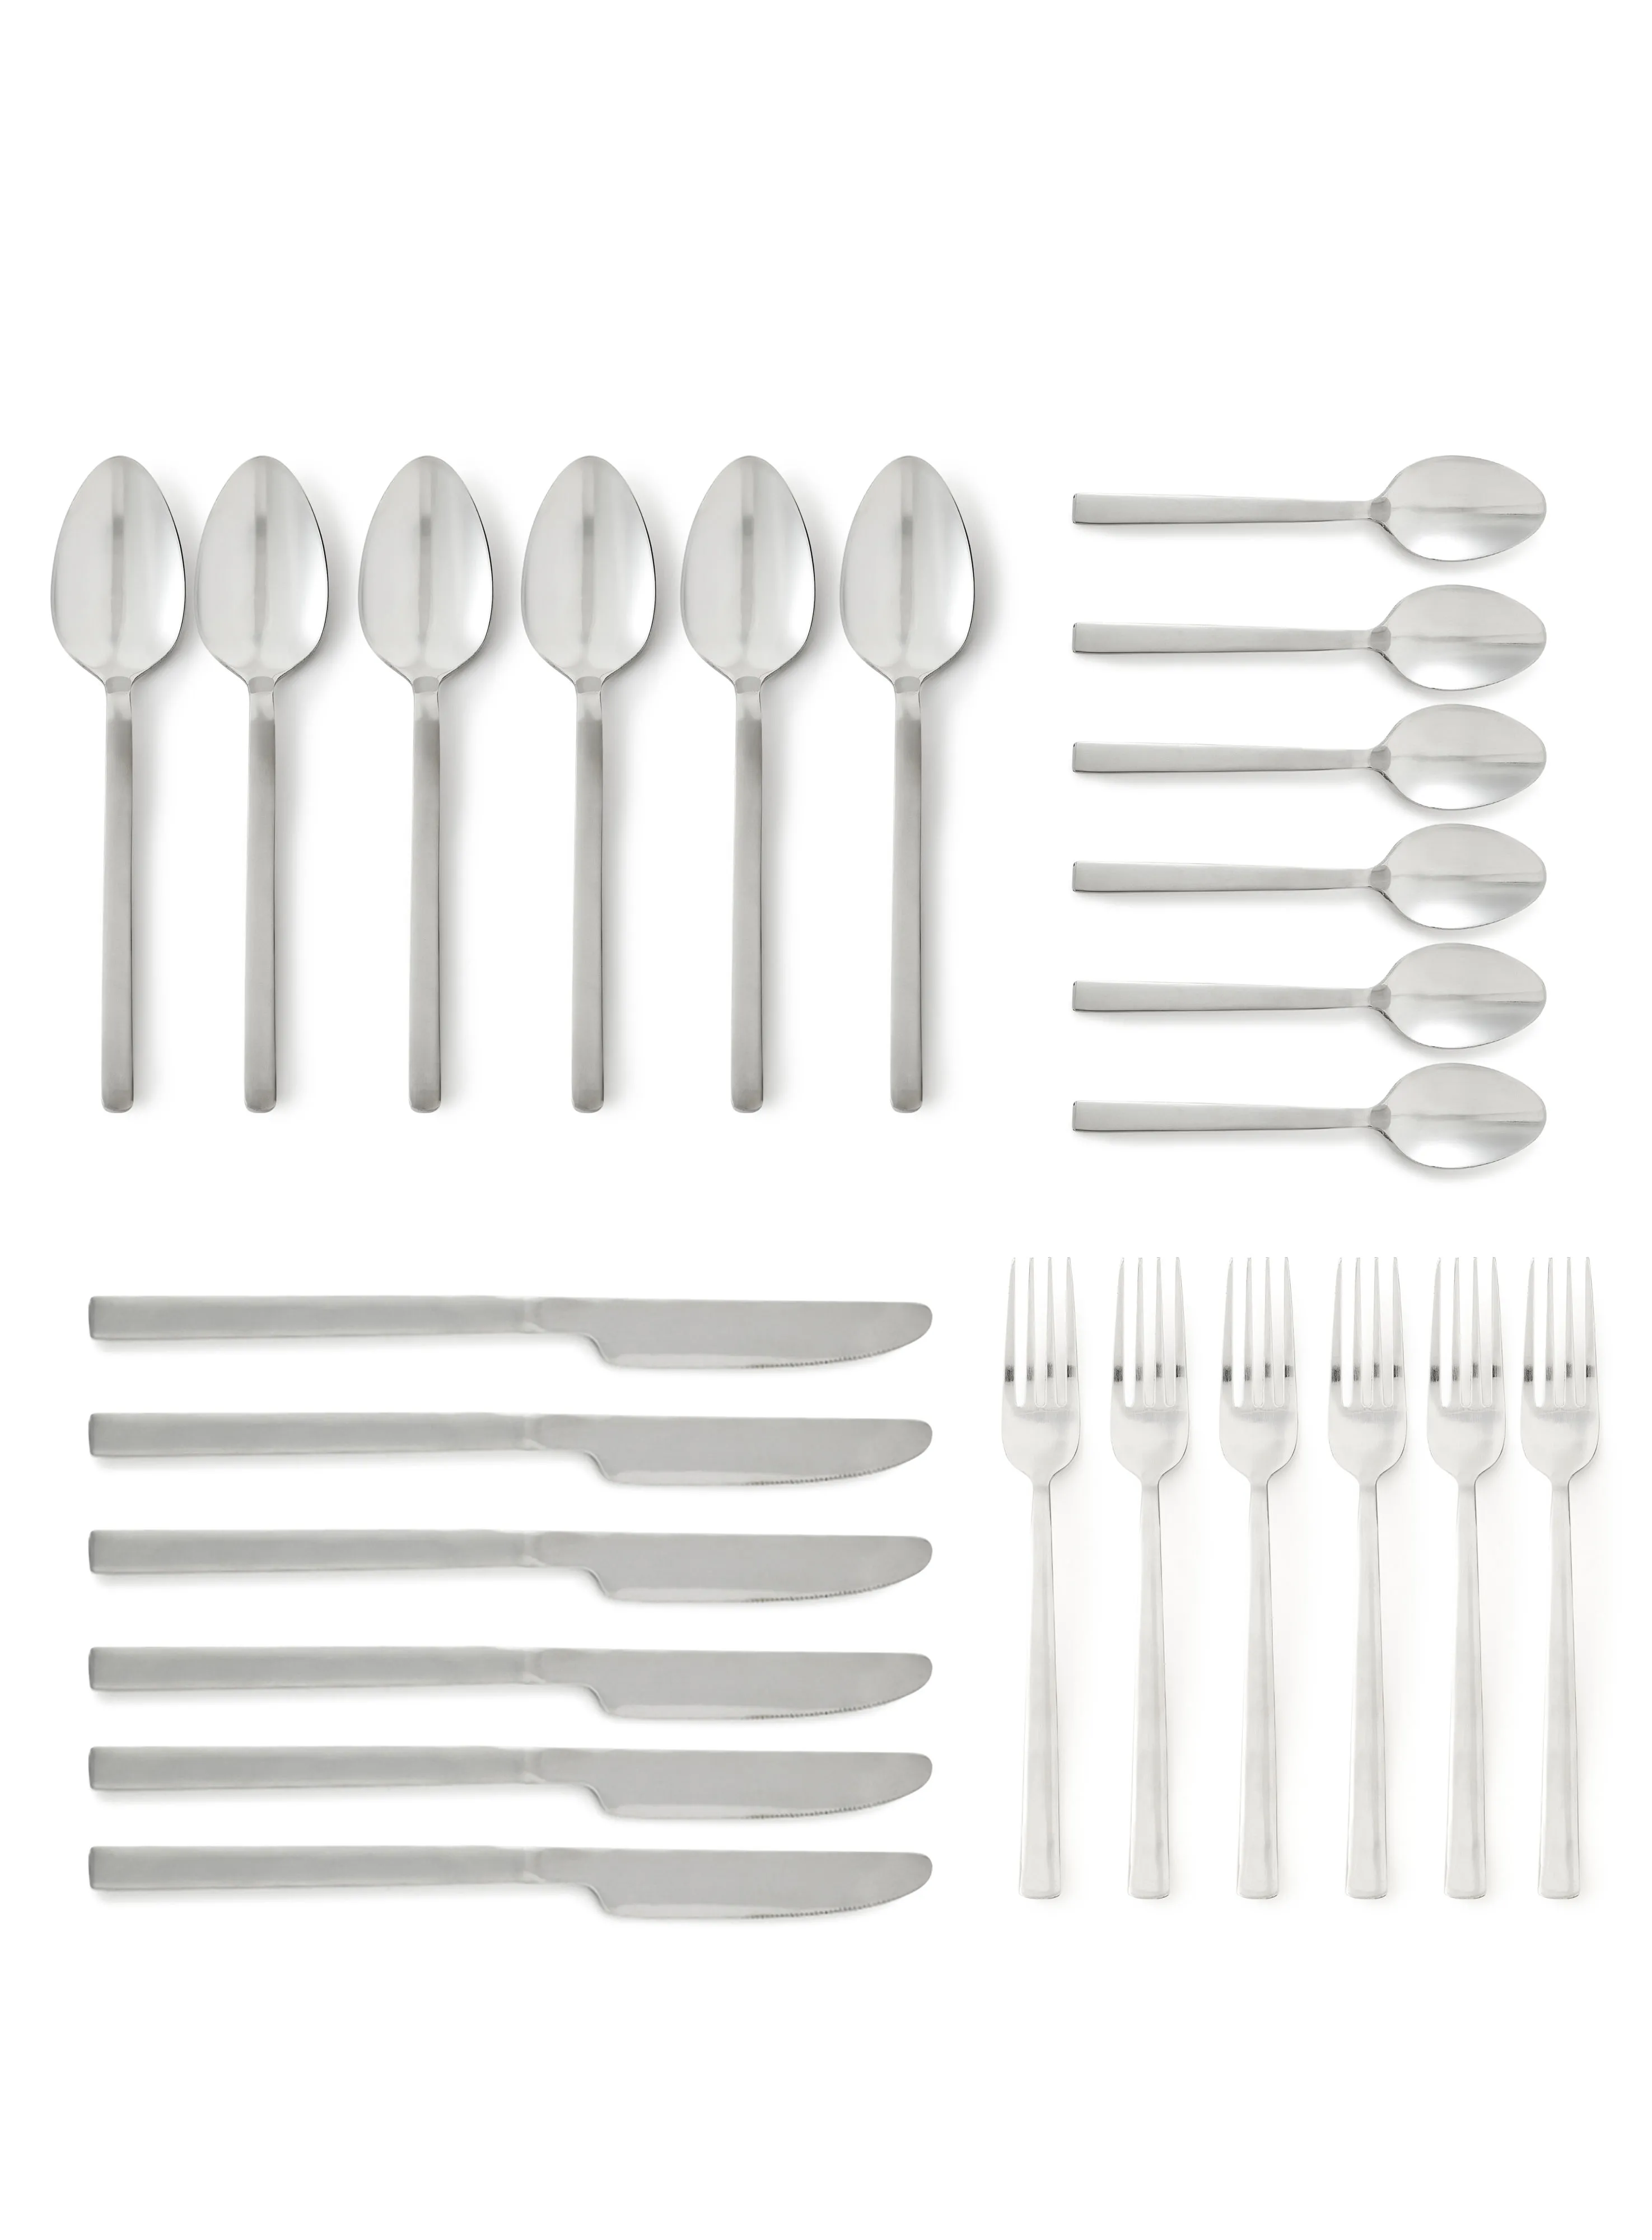 noon east 24 Piece Cutlery Set - Made Of Stainless Steel - Silverware Flatware - Spoons And Forks Set, Spoon Set - Table Spoons, Tea Spoons, Forks, Knives - Serves 6 - Design Silver Lyra